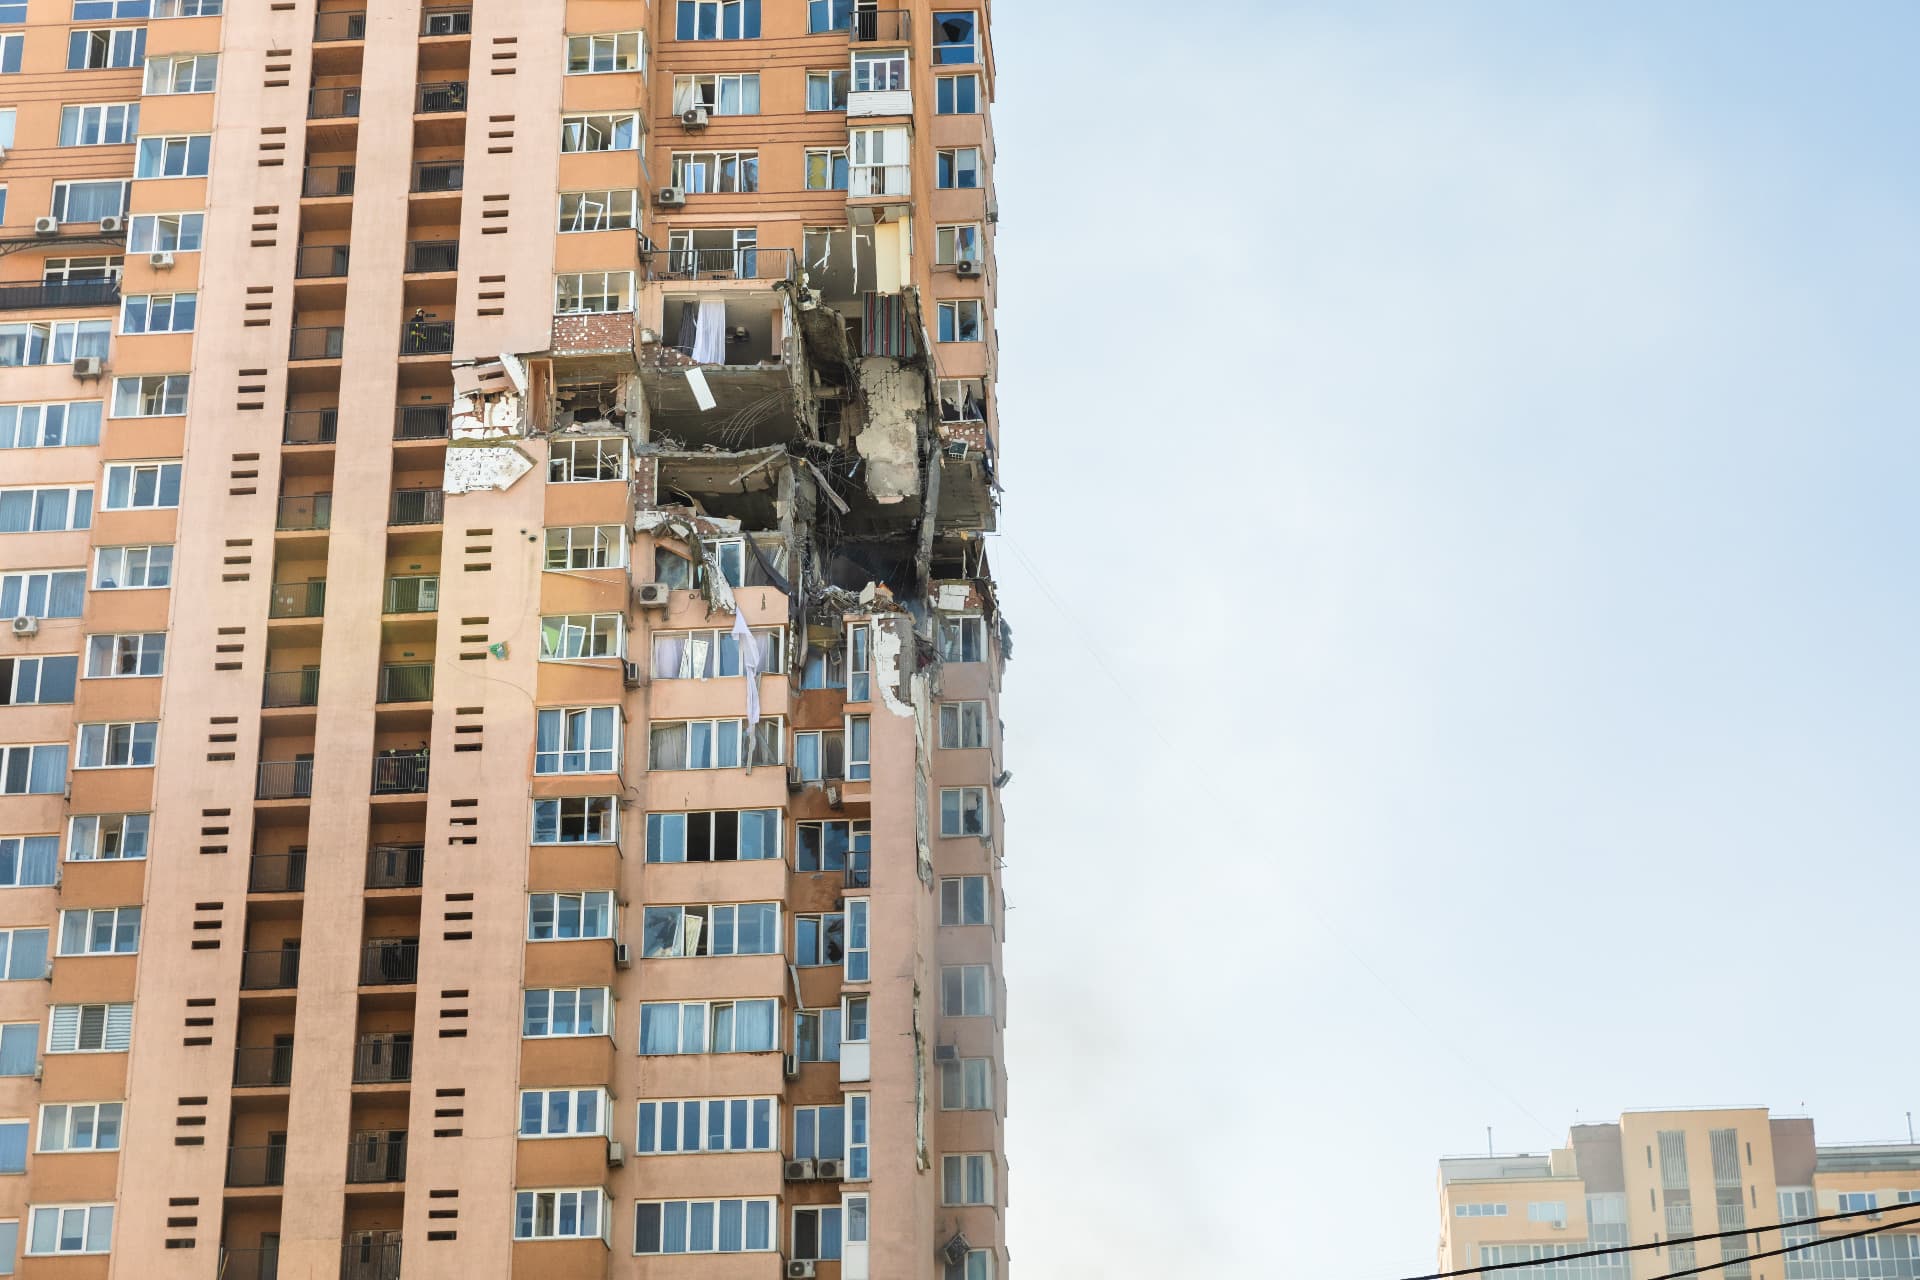 View of a civilian building damaged following a Russian rocket attack the city of Kyiv, Ukraine